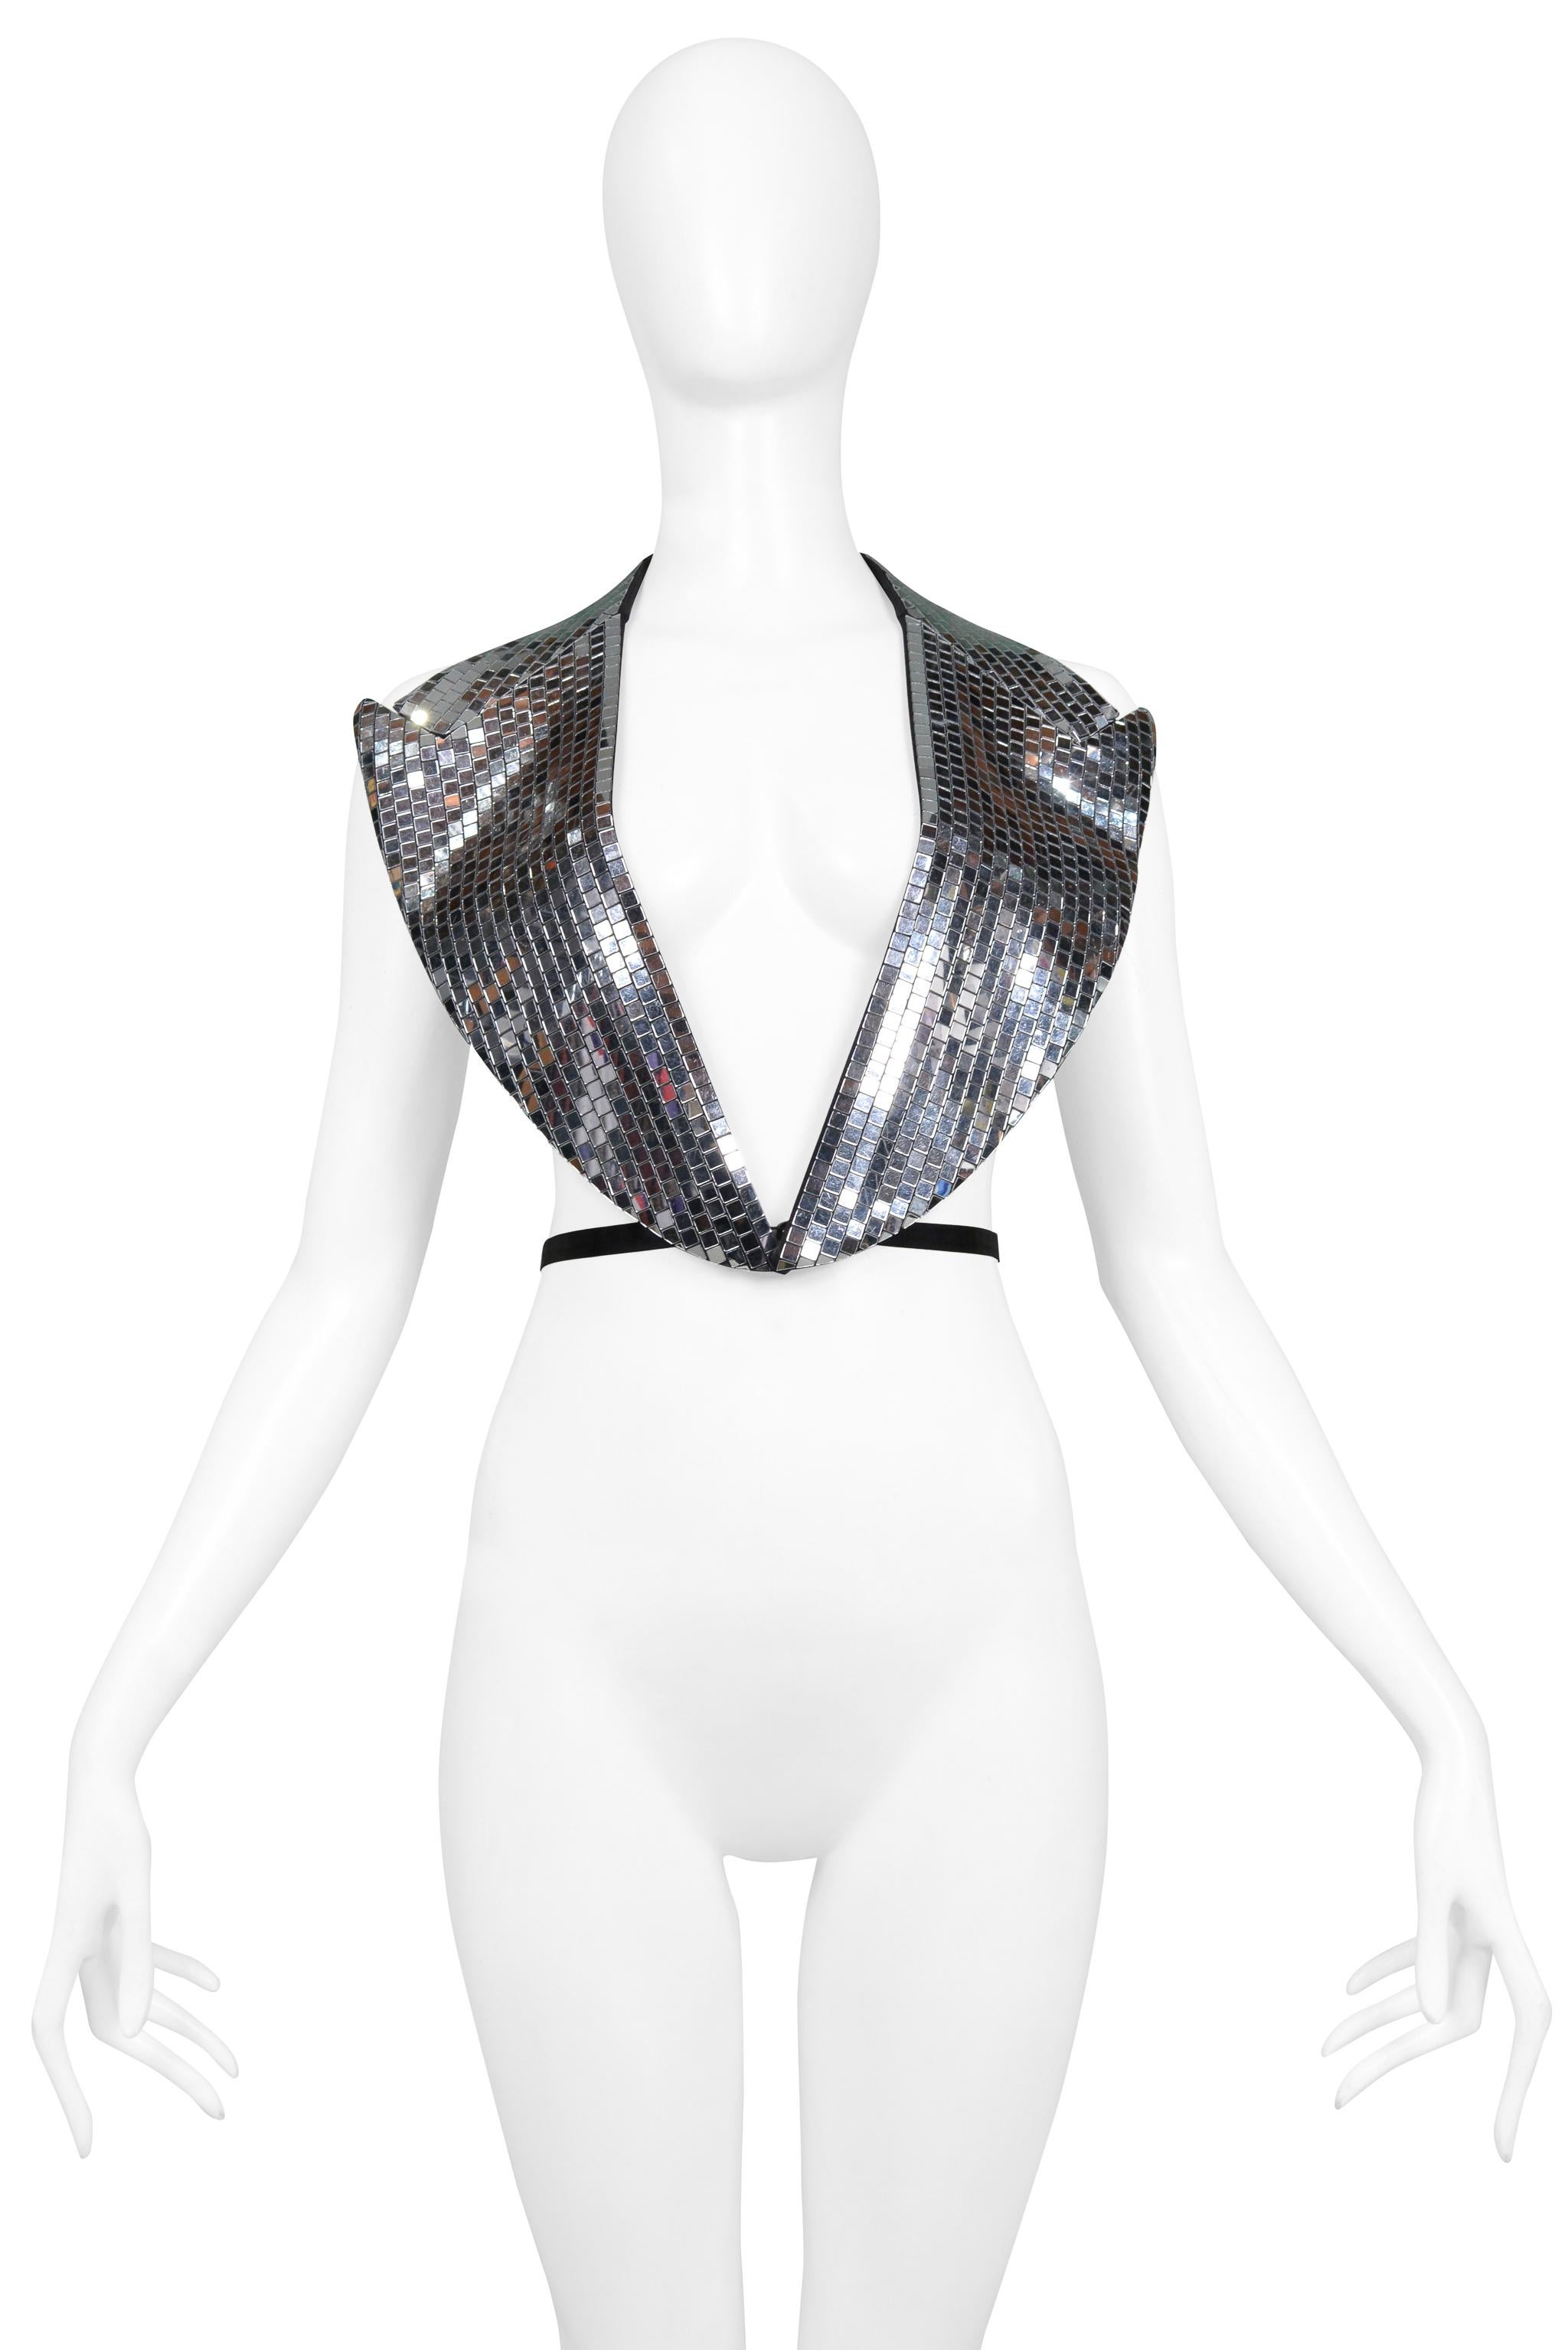 Margiela Artisanal Mirrored Disco Ball Vest Top 2009 In Excellent Condition In Los Angeles, CA